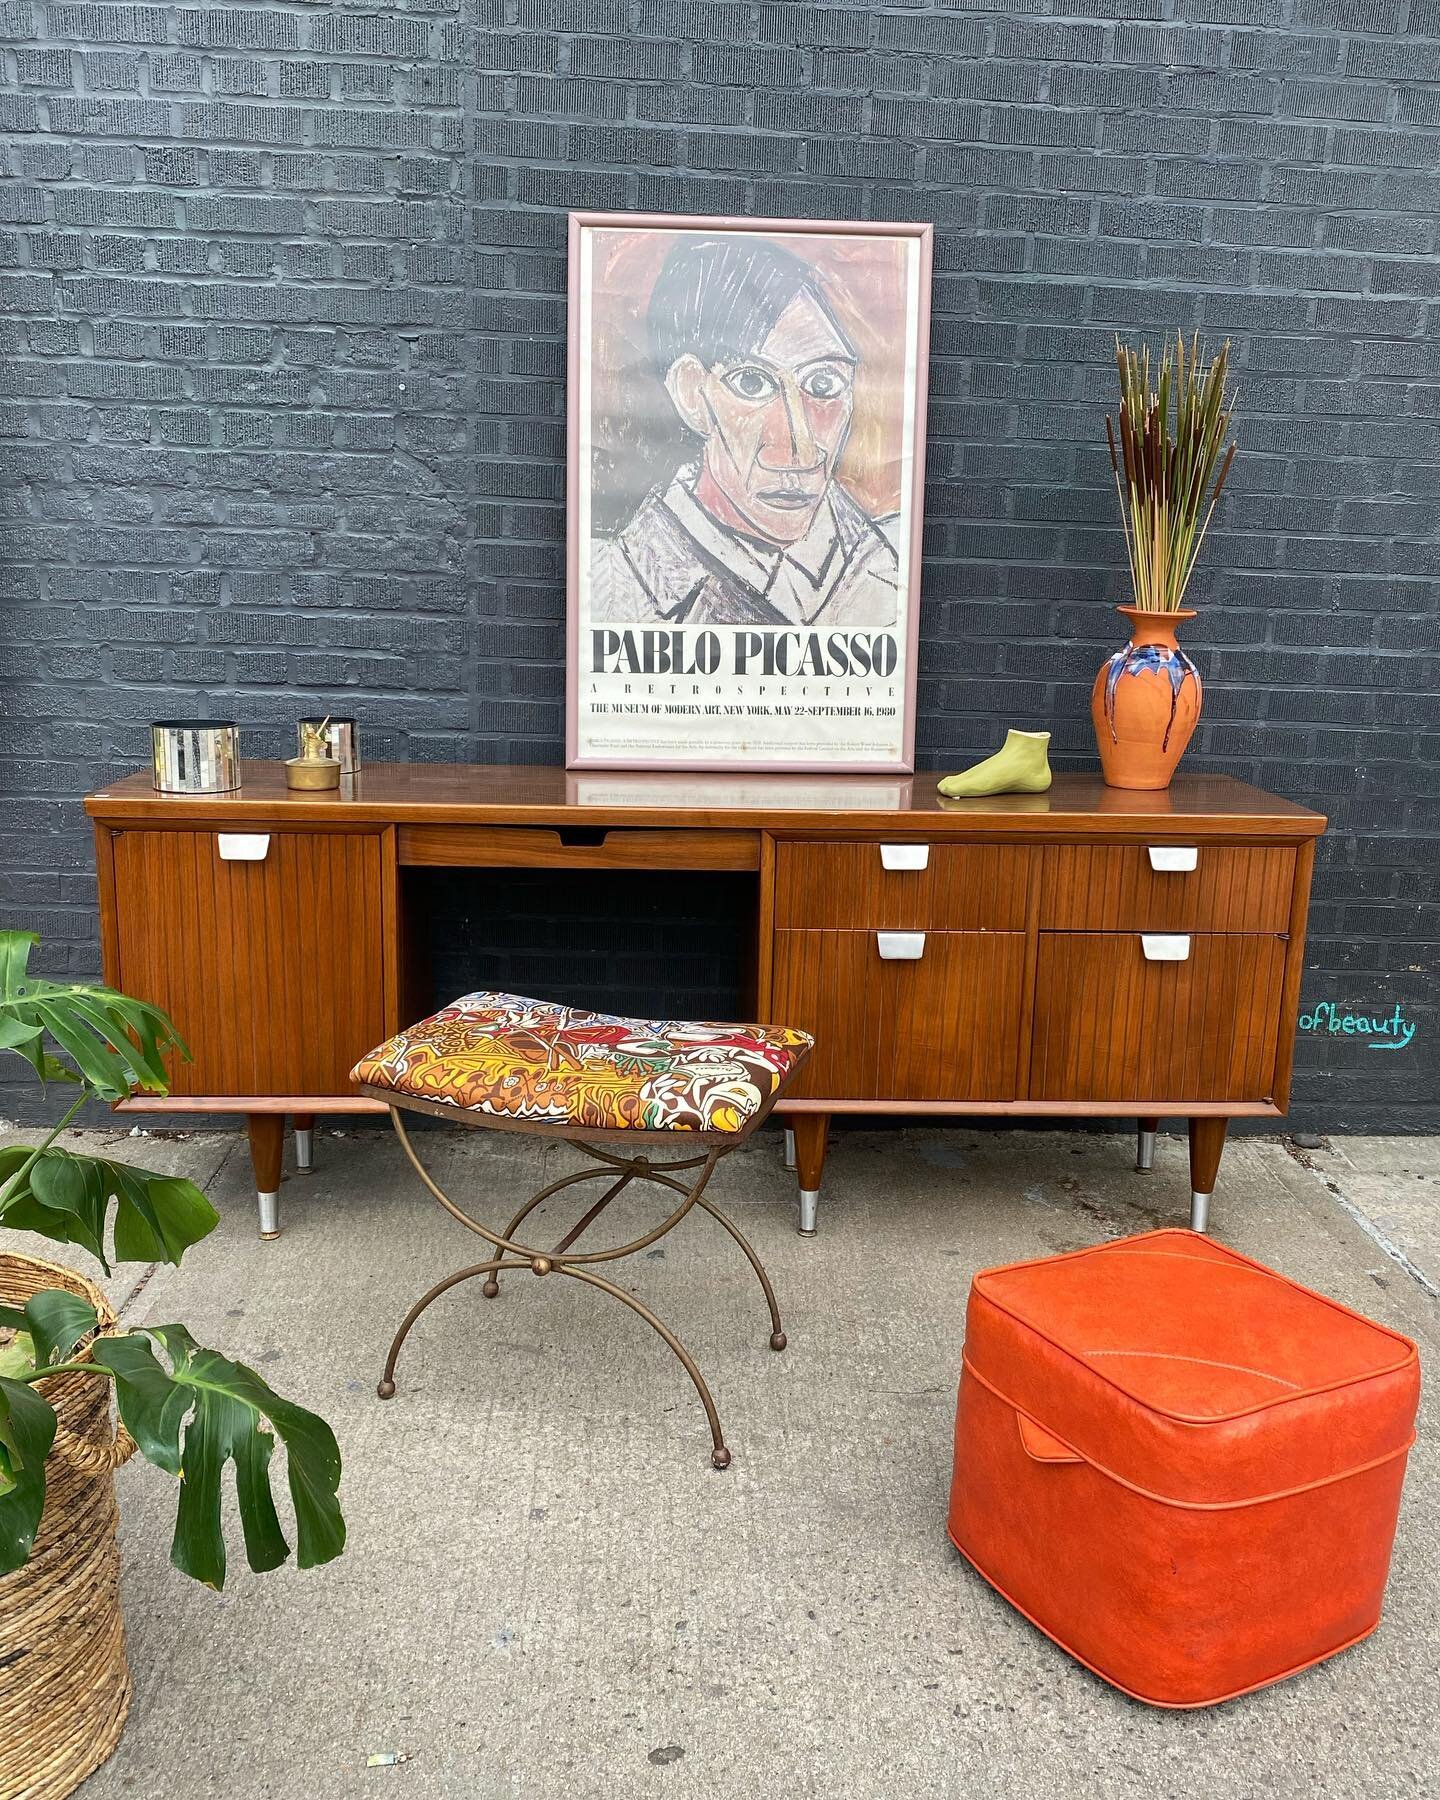 Classic design with a pop of Picasso🖼 Update your office space with a roomy mid century desk ✏️🖇📥 Now available in Greenpoint. 

XL Desk (76&rdquo; L x 18&rdquo;D x 29.75&rdquo; H) -SOLD 
Picasso Art (24.75&rdquo; L x 37.5&rdquo; H) -SOLD
Picasso 